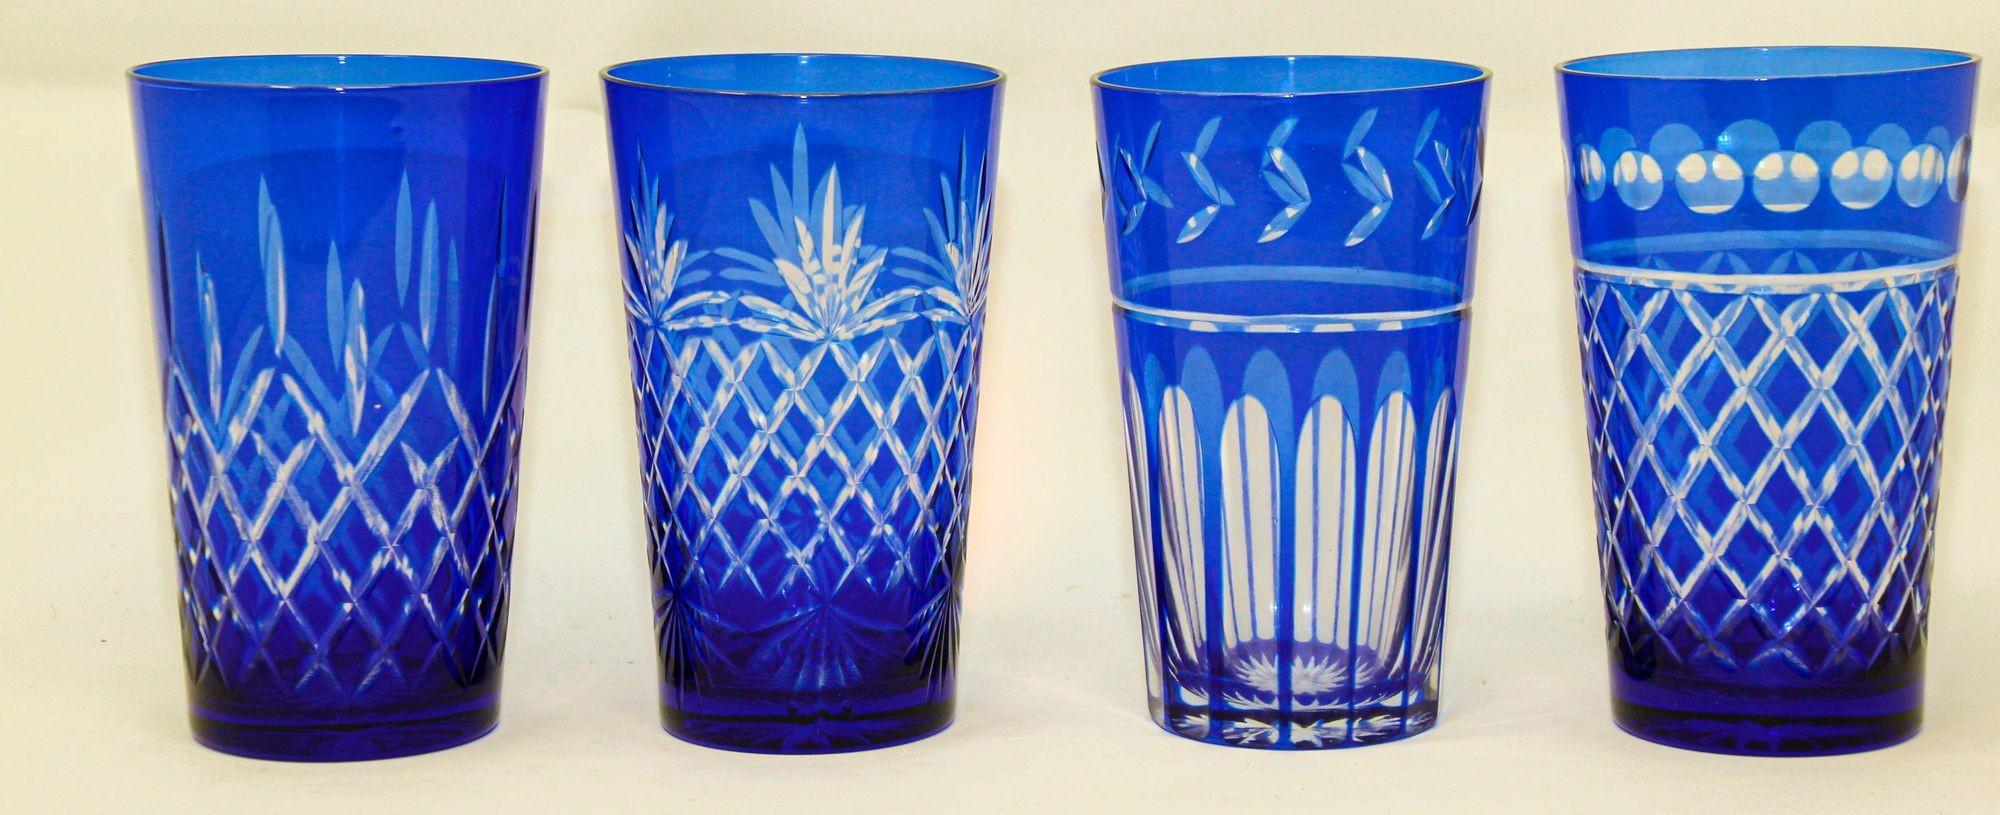 Set of eleven hand made cobalt blue cut to clear crystal drinking rock glasses tumblers highball barware in Baccarat style.
Fabulous Baccarat French style vintage cobalt blue tumblers drinking glasses in beautiful color of deep cobalt blue and